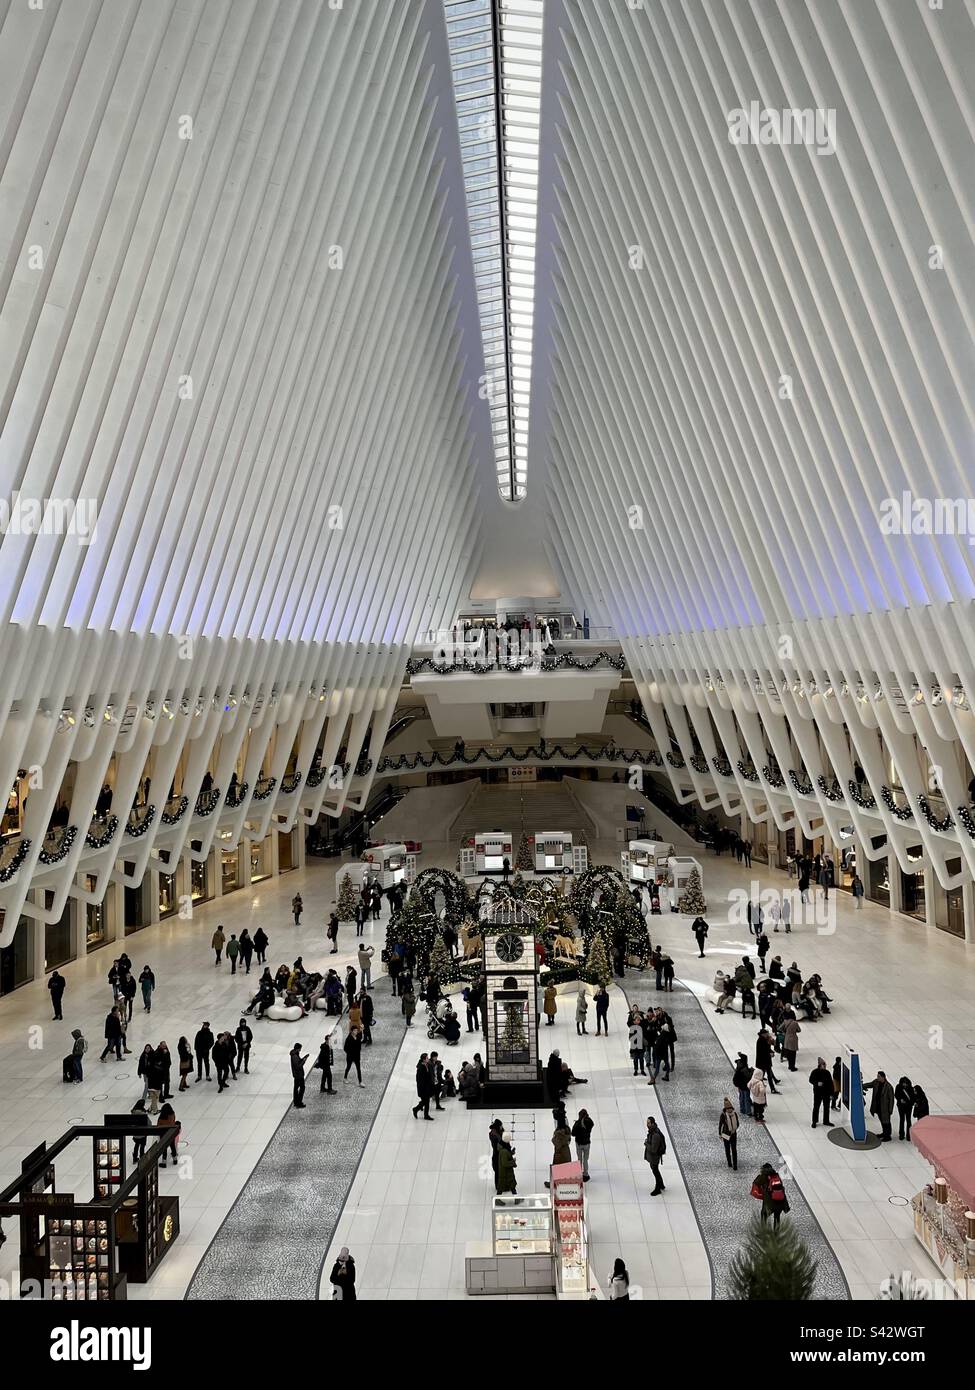 Interior view of the New York oculus with its modern architecture. Photo taken in New York in December 202 Stock Photo